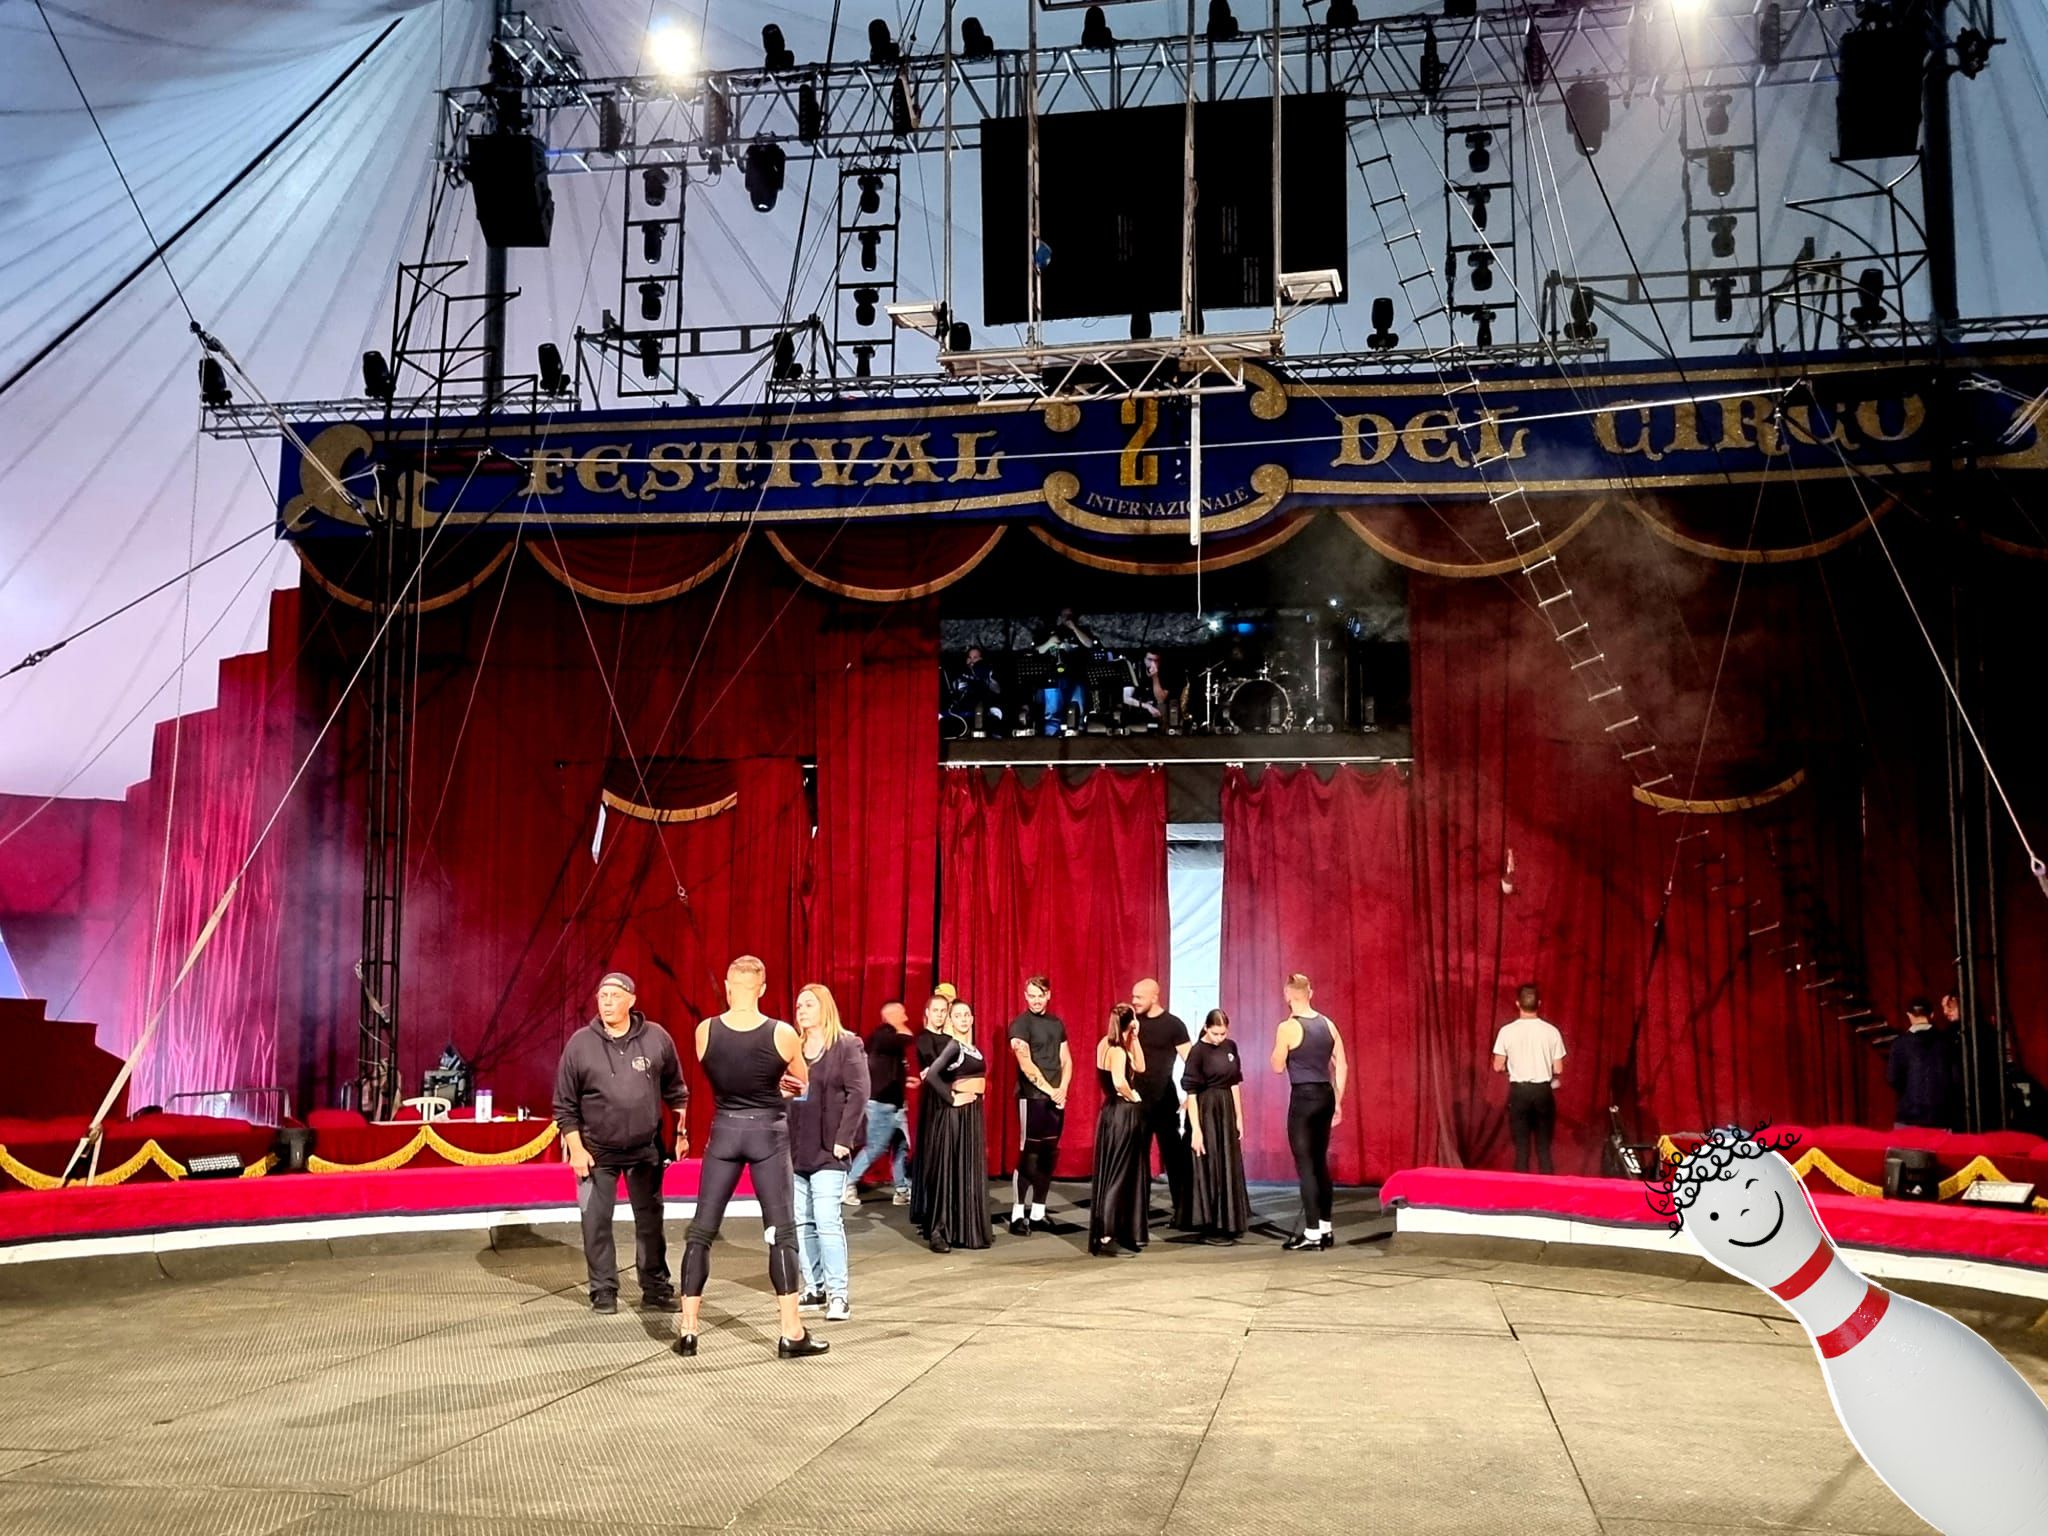 Strong Hungarian presence at the International Circus Festival of Italy